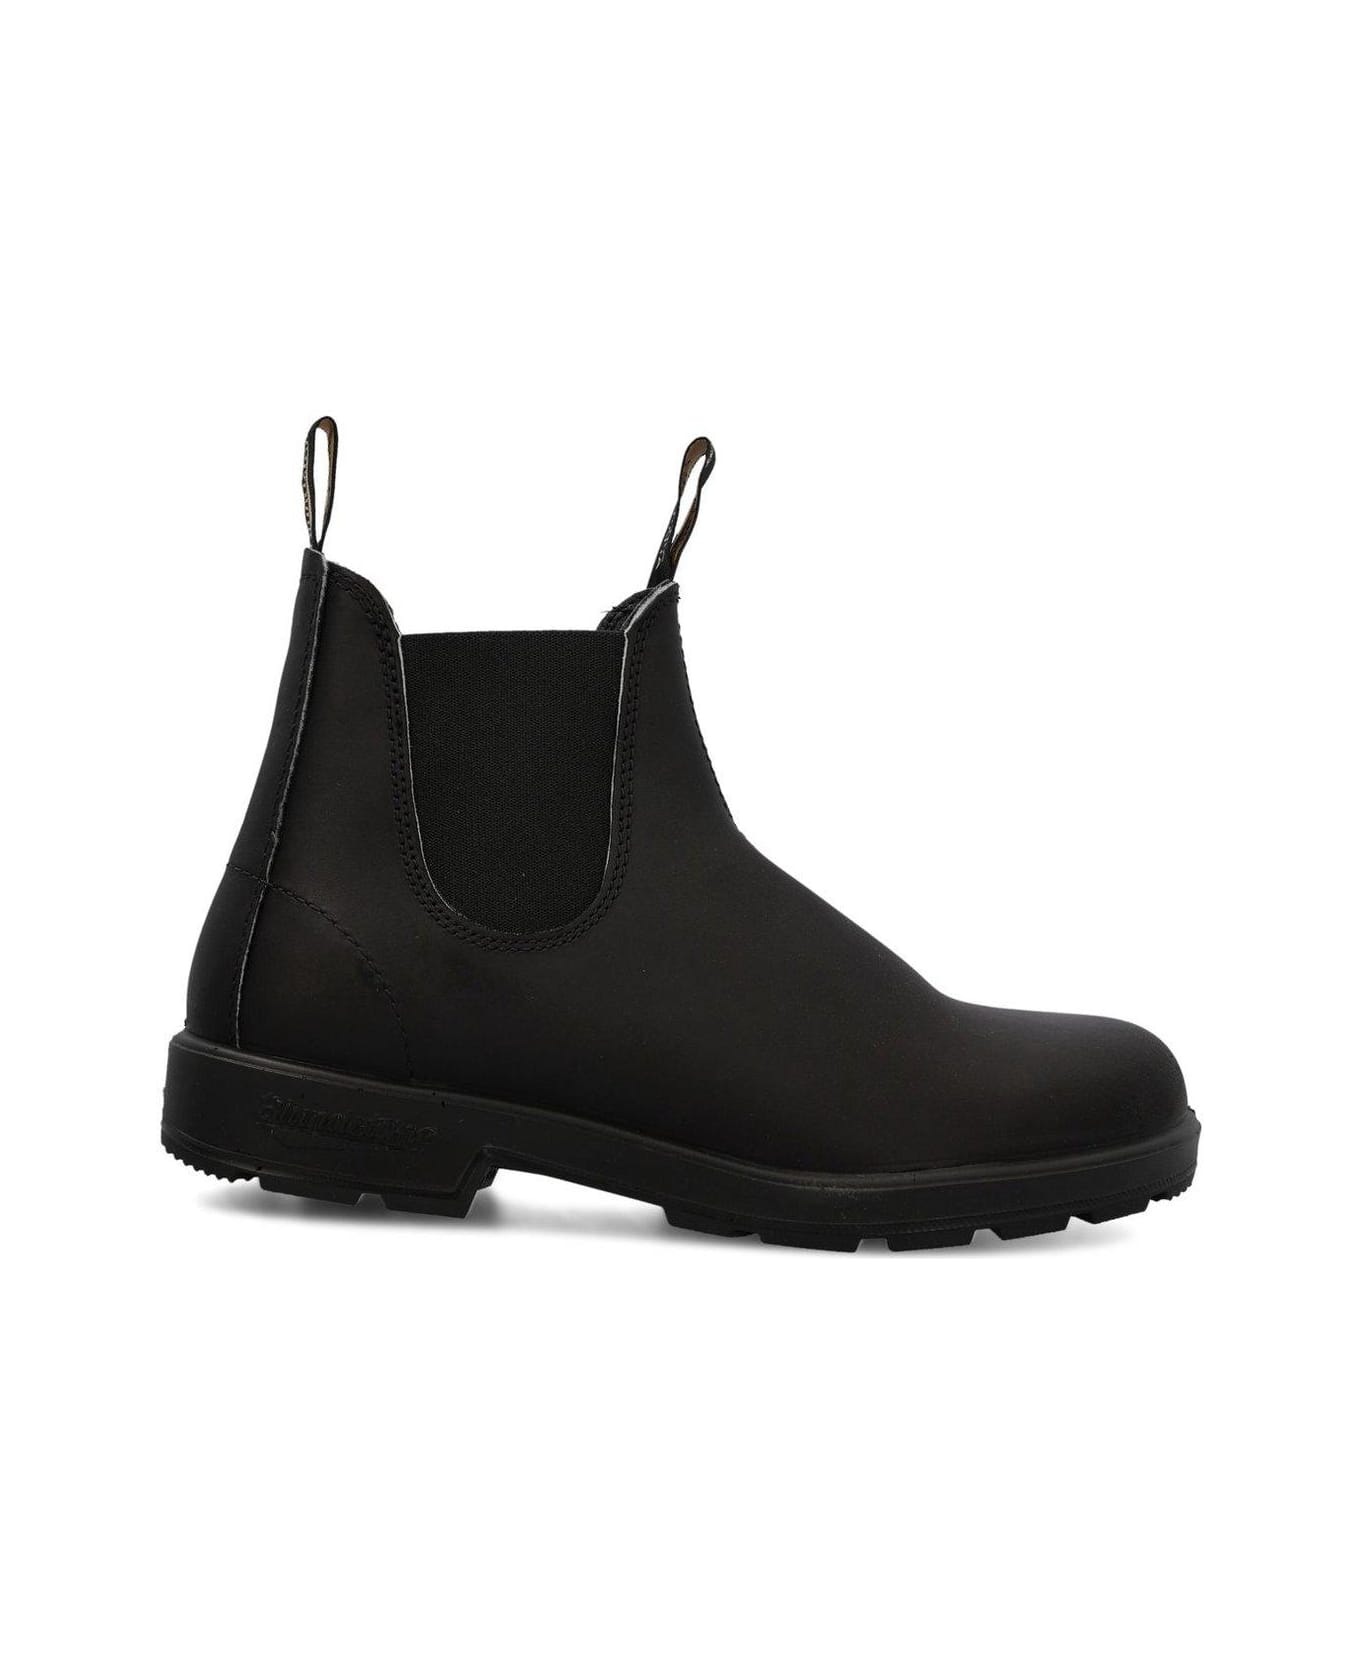 Blundstone Round-toe Ankle Boots - Black name:458